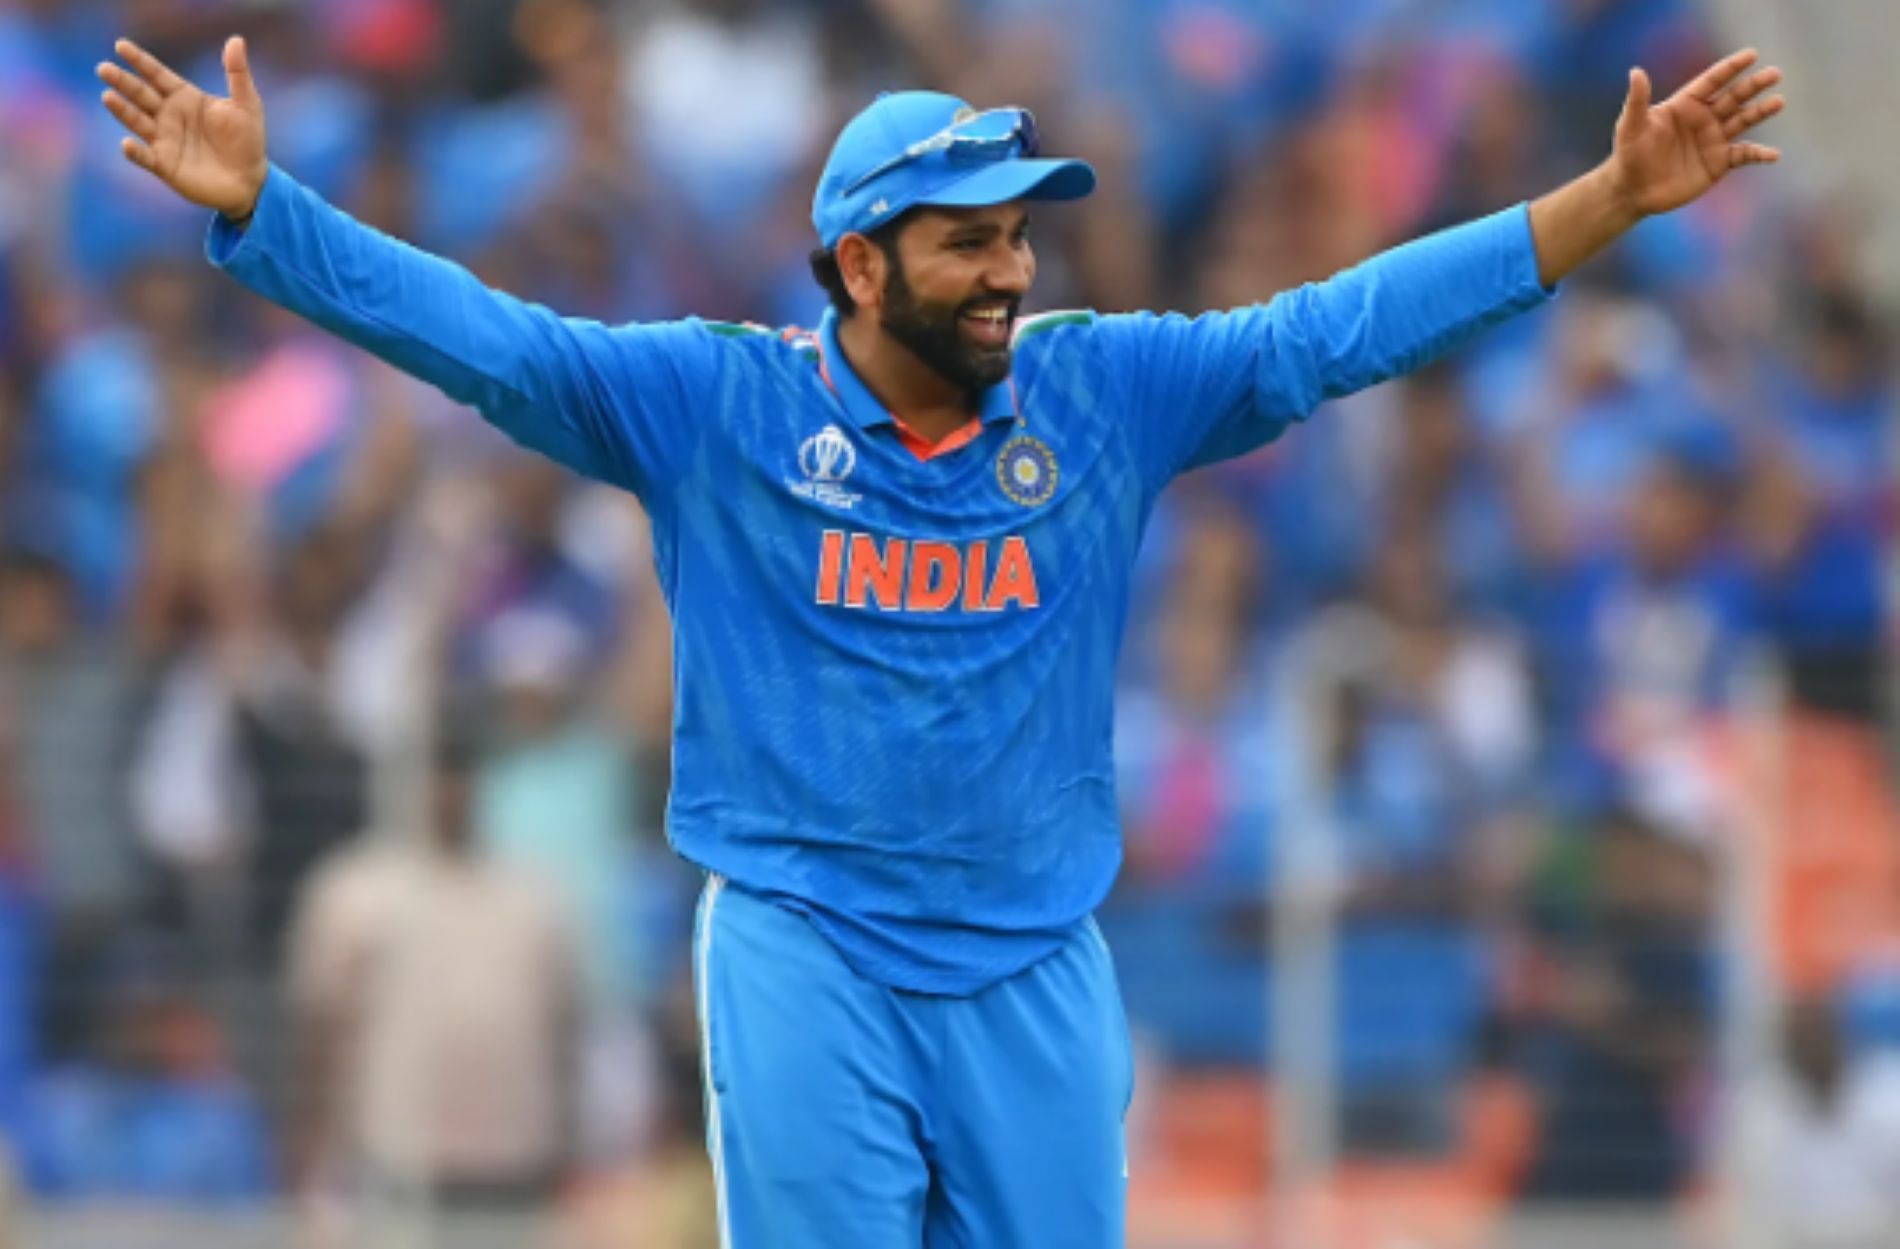 Rohit Sharma led India admirably in the recent home ODI World Cup